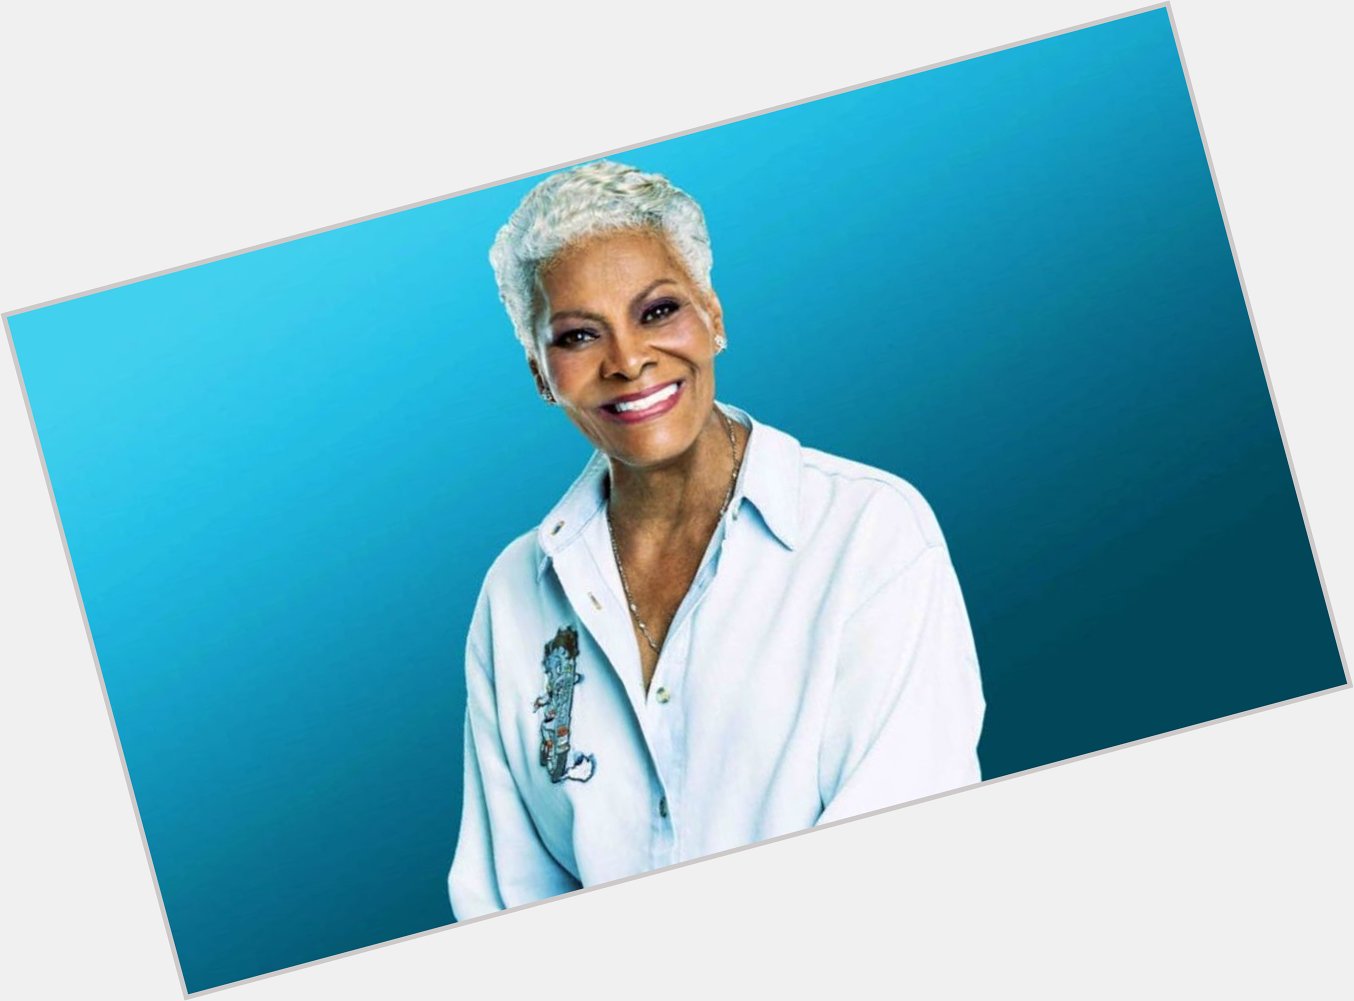 Happy Birthday to the living legend,  What are your top 5 songs by Dionne Warwick? 